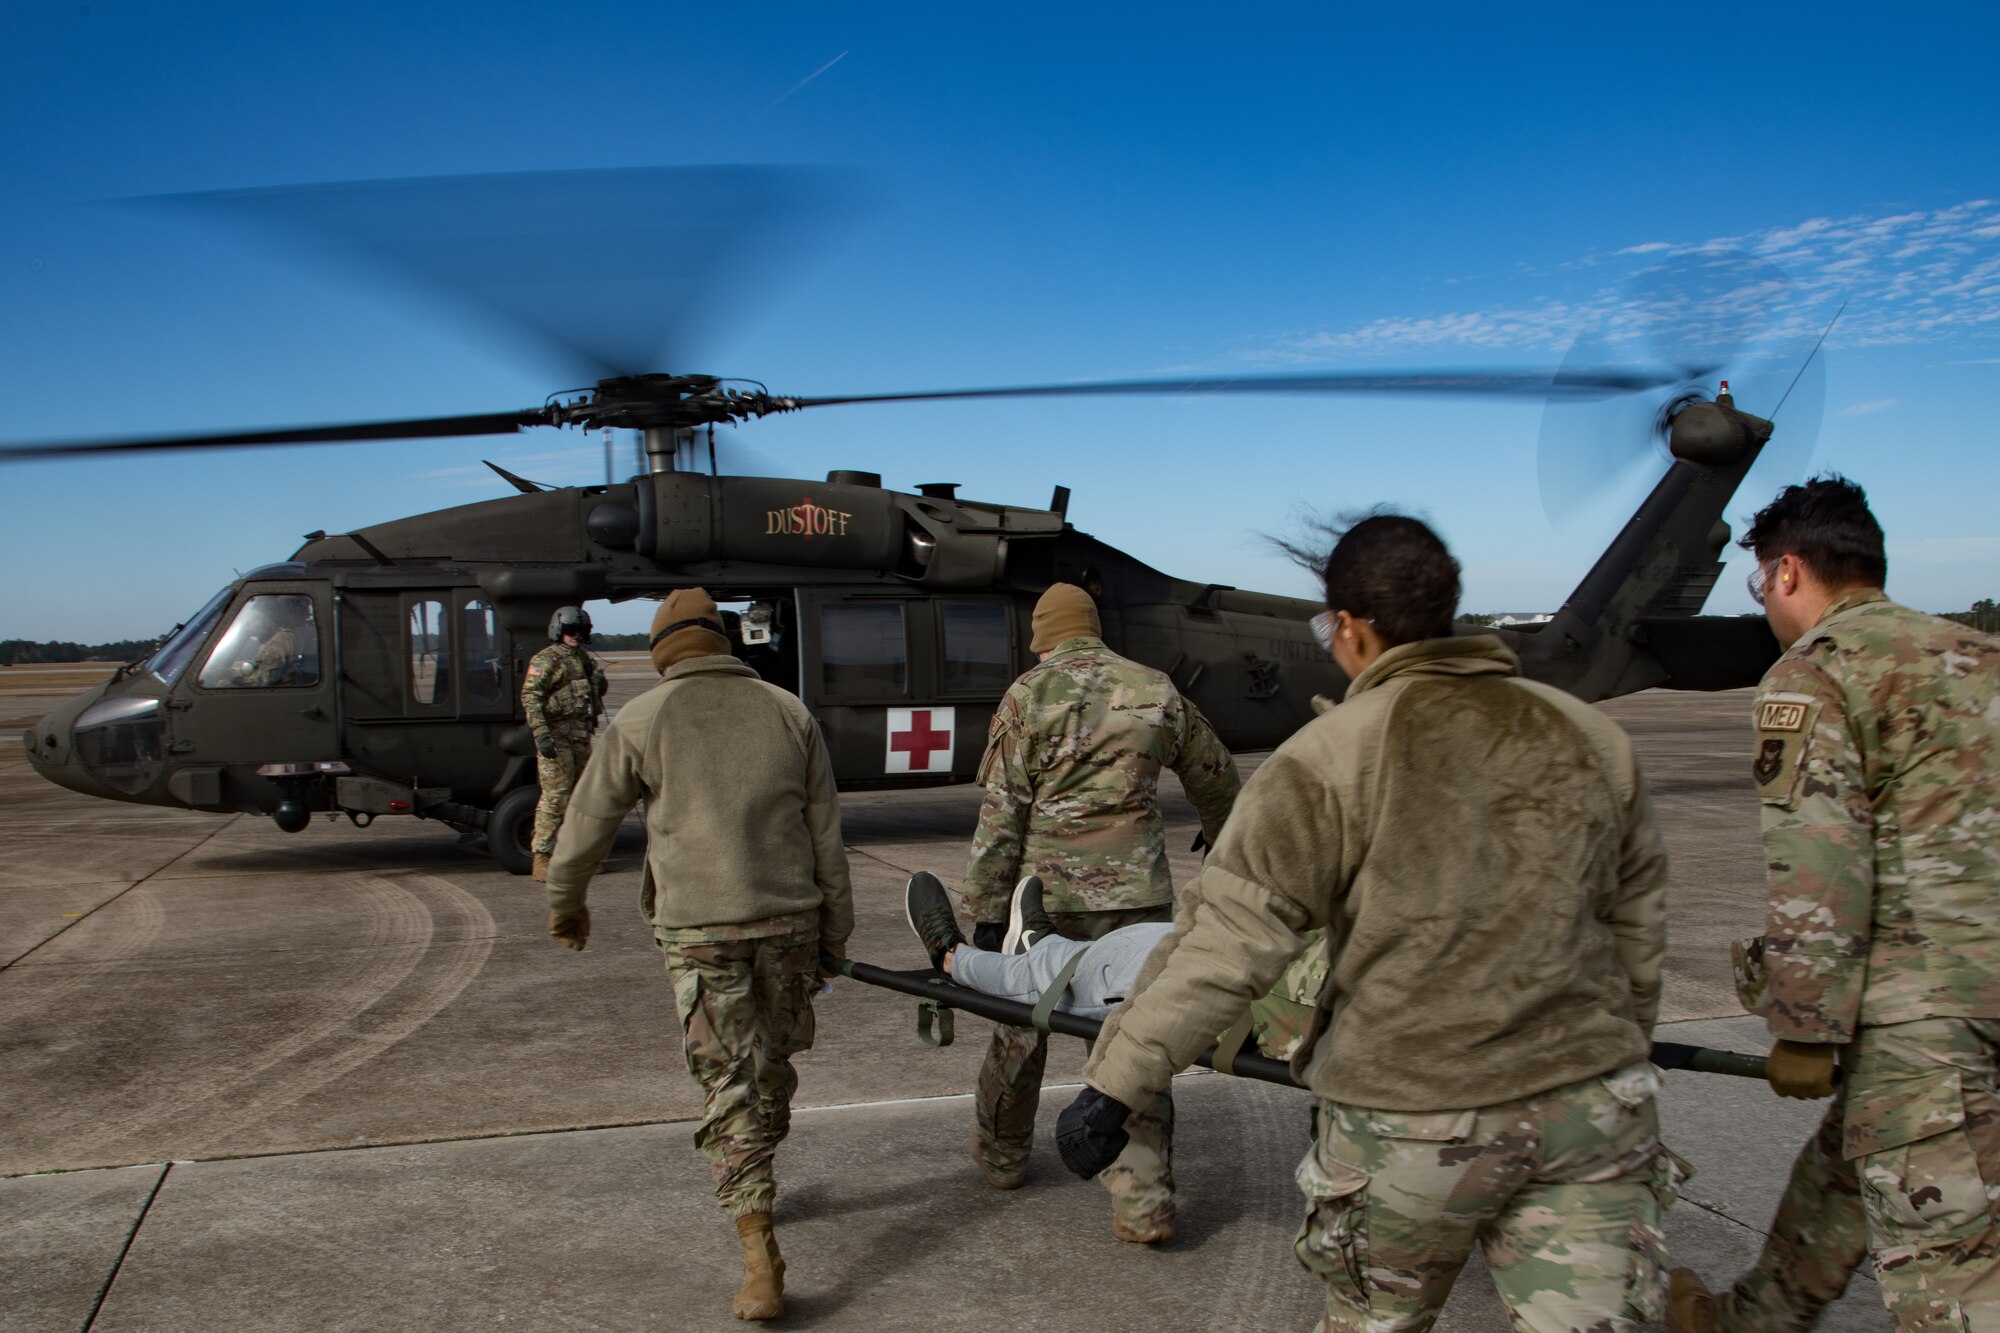 U.S. Airmen in uniform transport a litter to a UH-60 Blackhawk helicopter with its engine running.